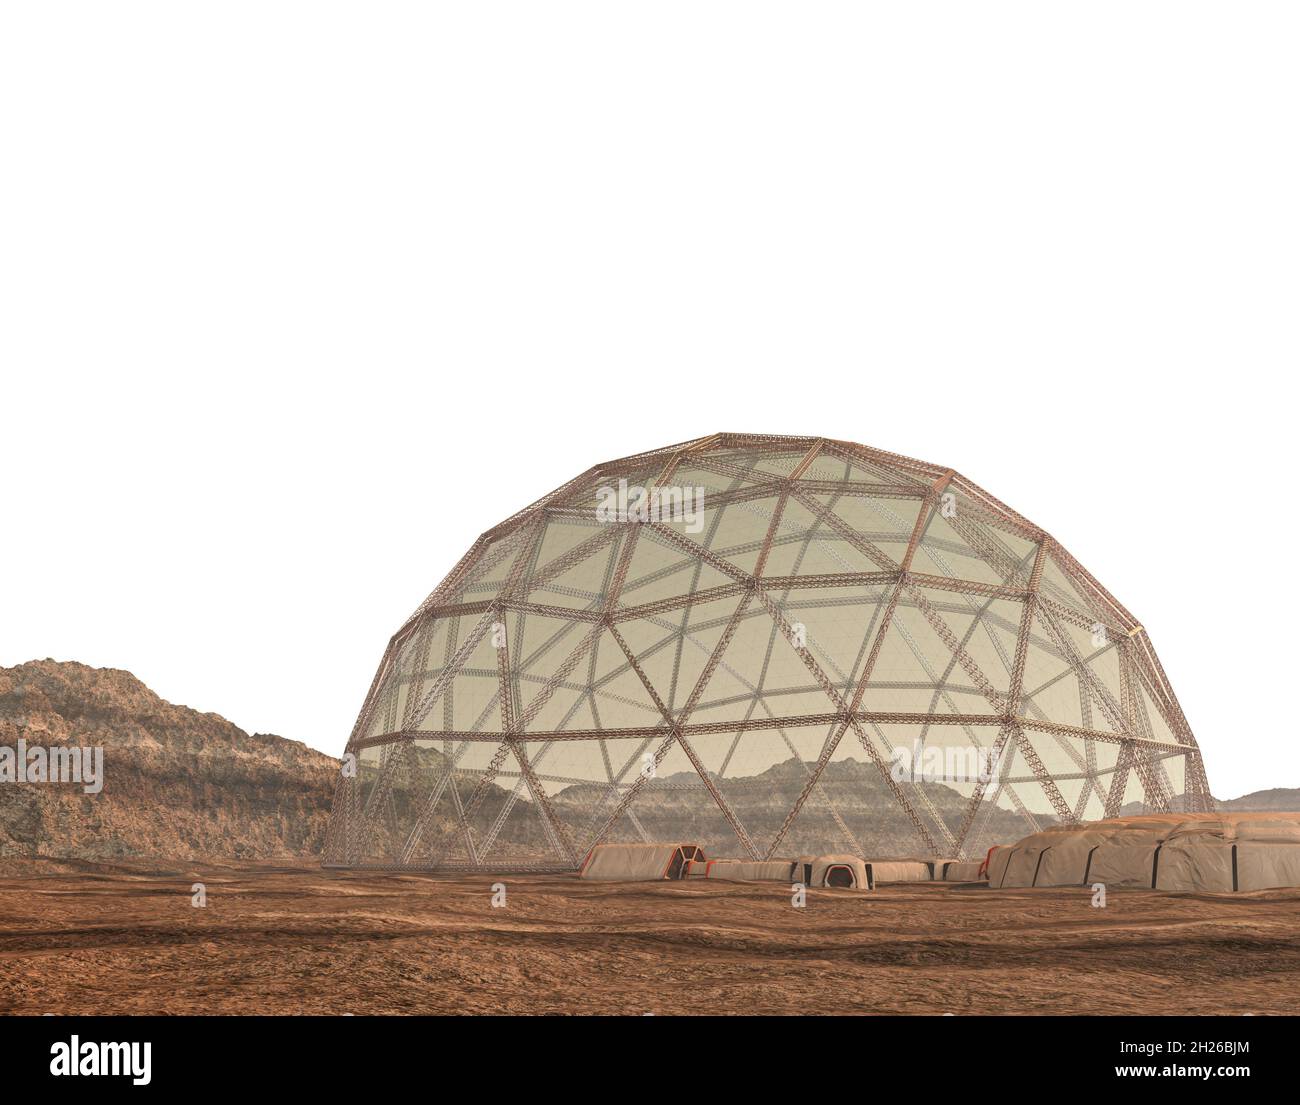 3D geodesic dome, entry airlocks and a mountainous horizon for Mars outpost colony illustrations or space exploration backgrounds, with the outline cl Stock Photo